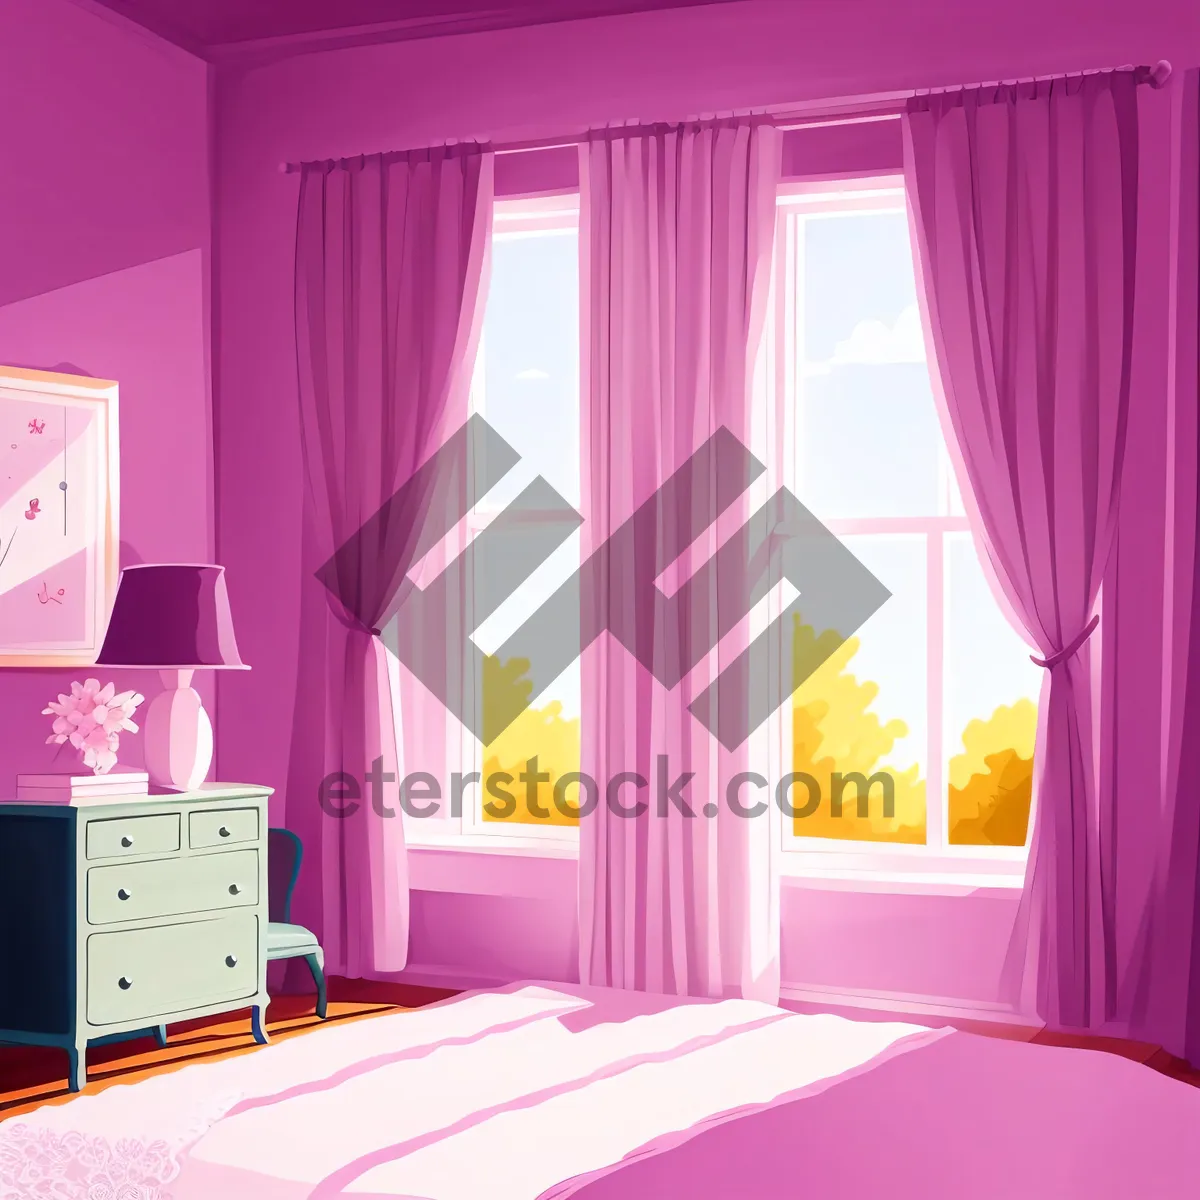 Picture of Modern and comfortable bedroom with stylish furniture.